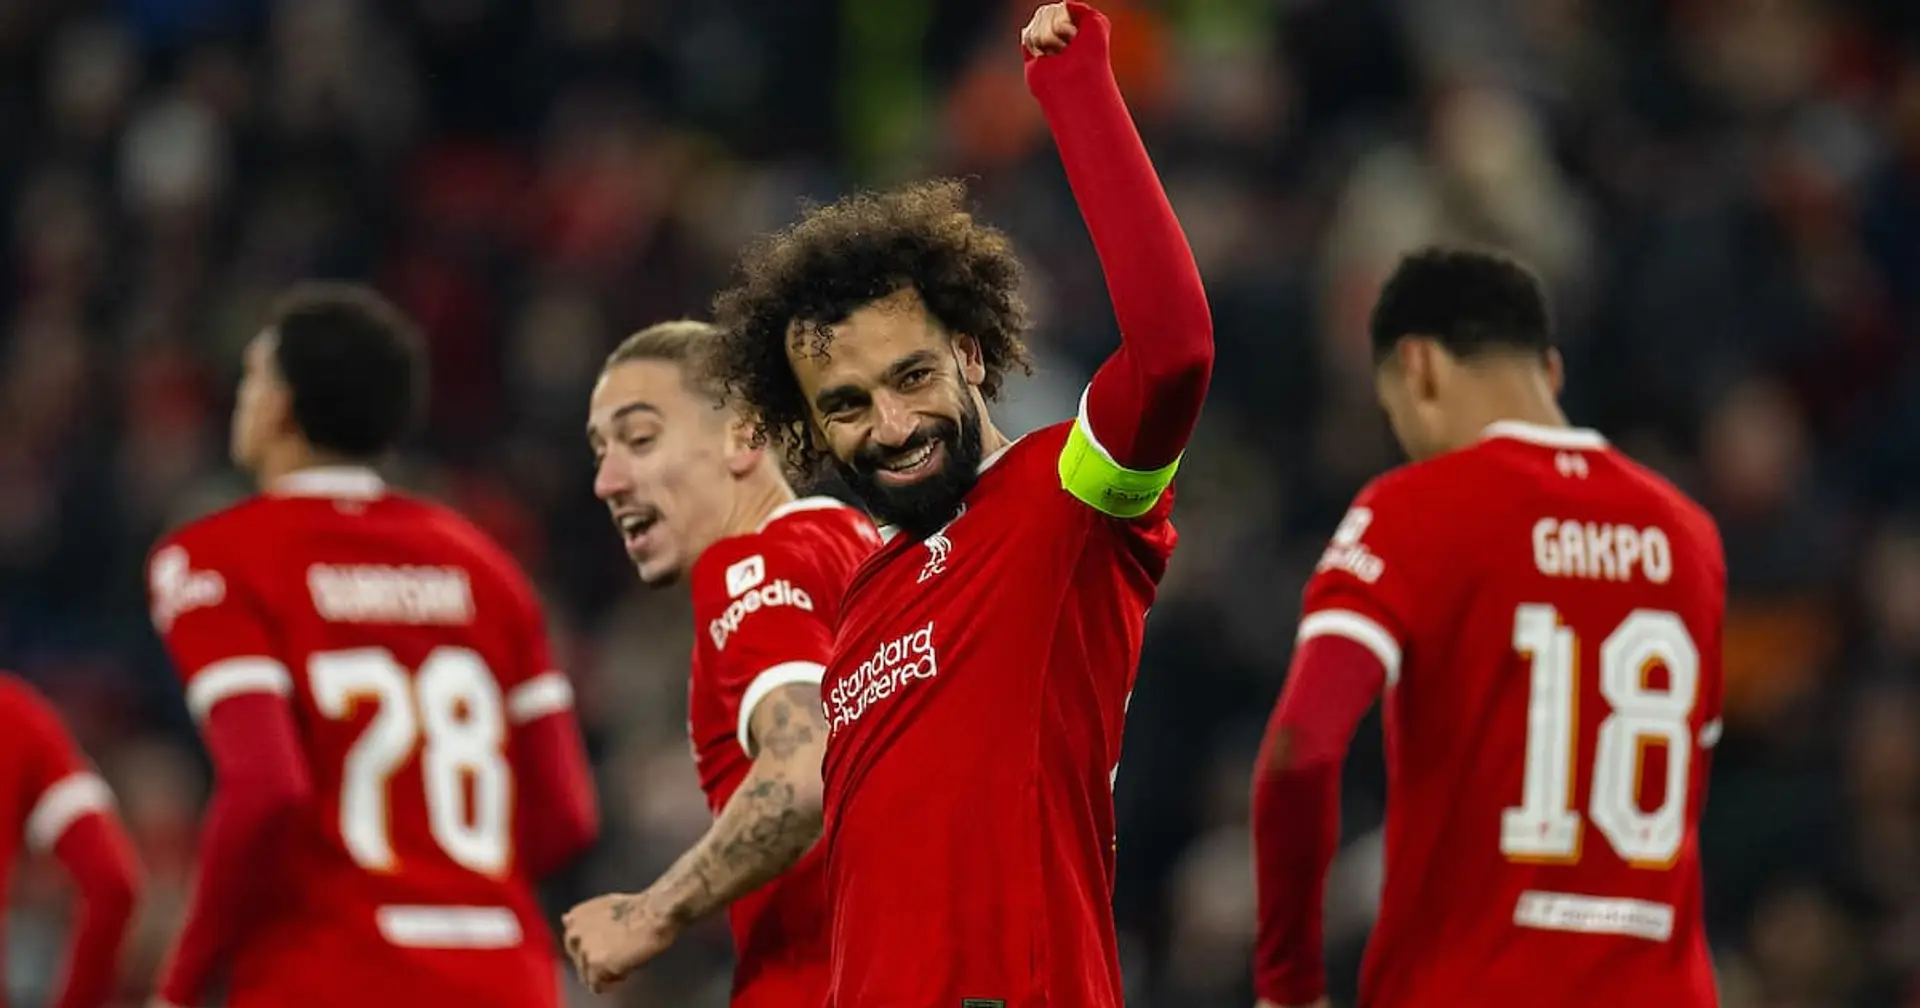 Liverpool secure top-place finish in Europa League group